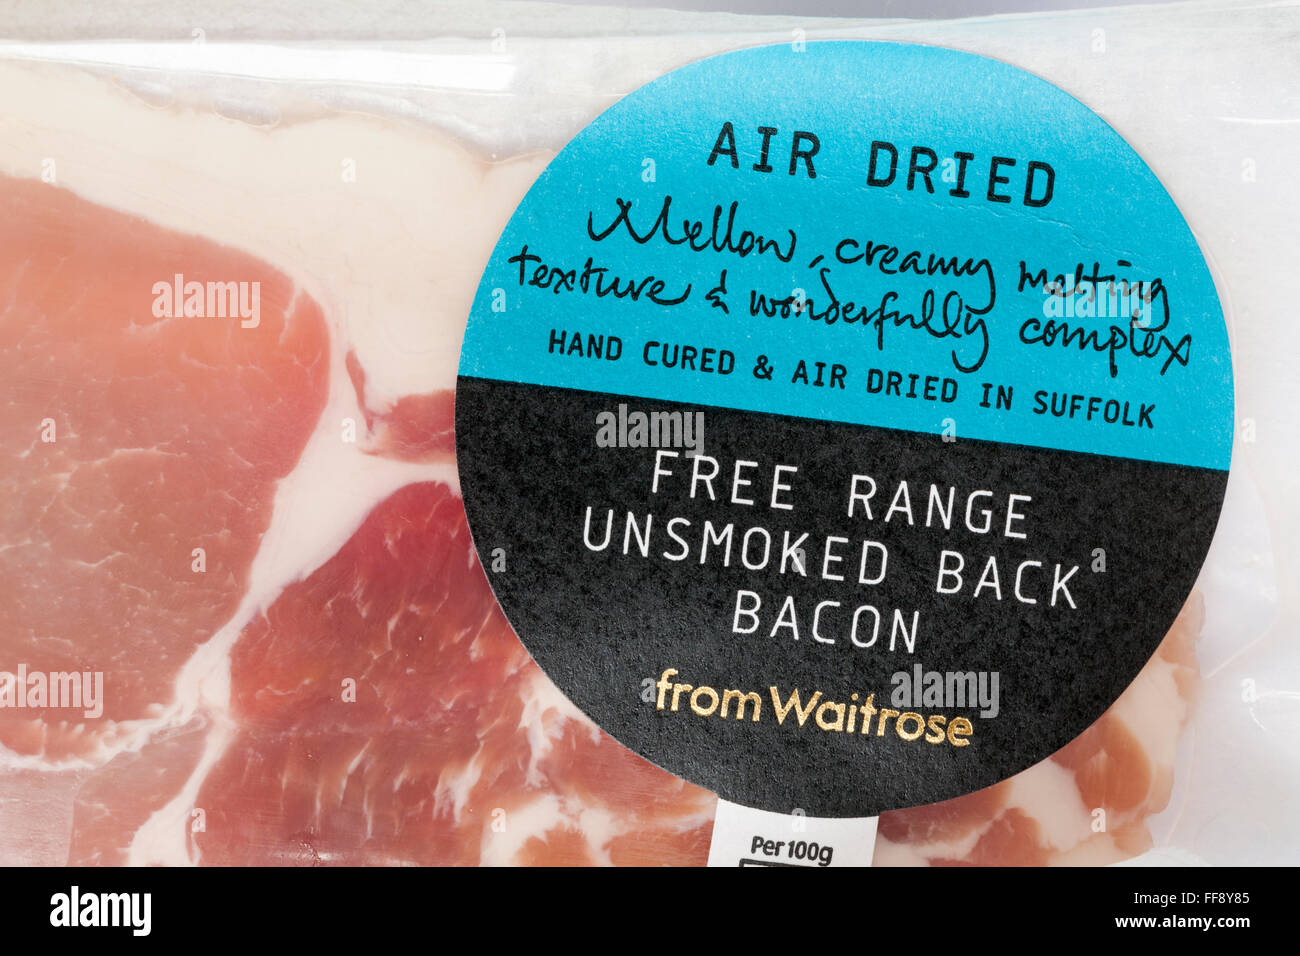 pack of Air dried free range unsmoked back bacon from Waitrose, hand cured & air dried in Suffolk Stock Photo